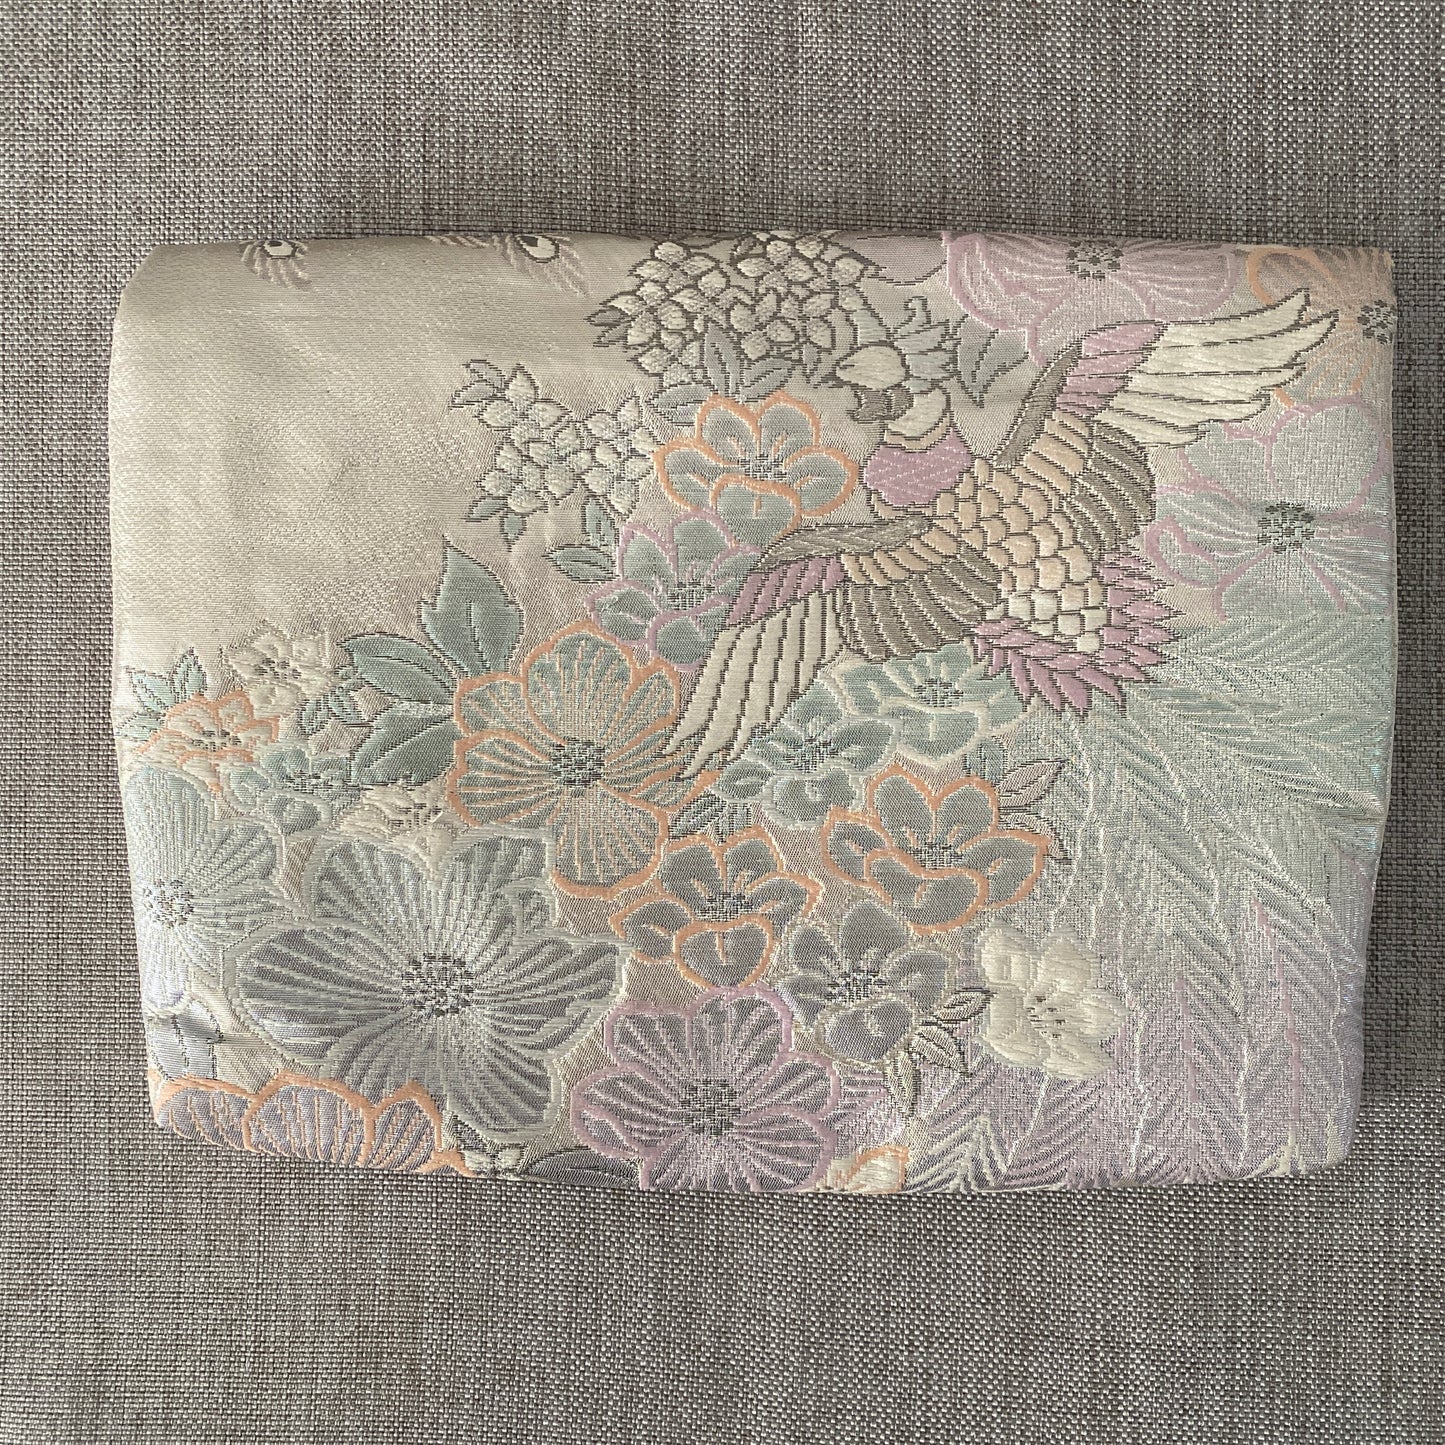 Silk Obi Pouch, Clutch, Handcrafted, Upcycled